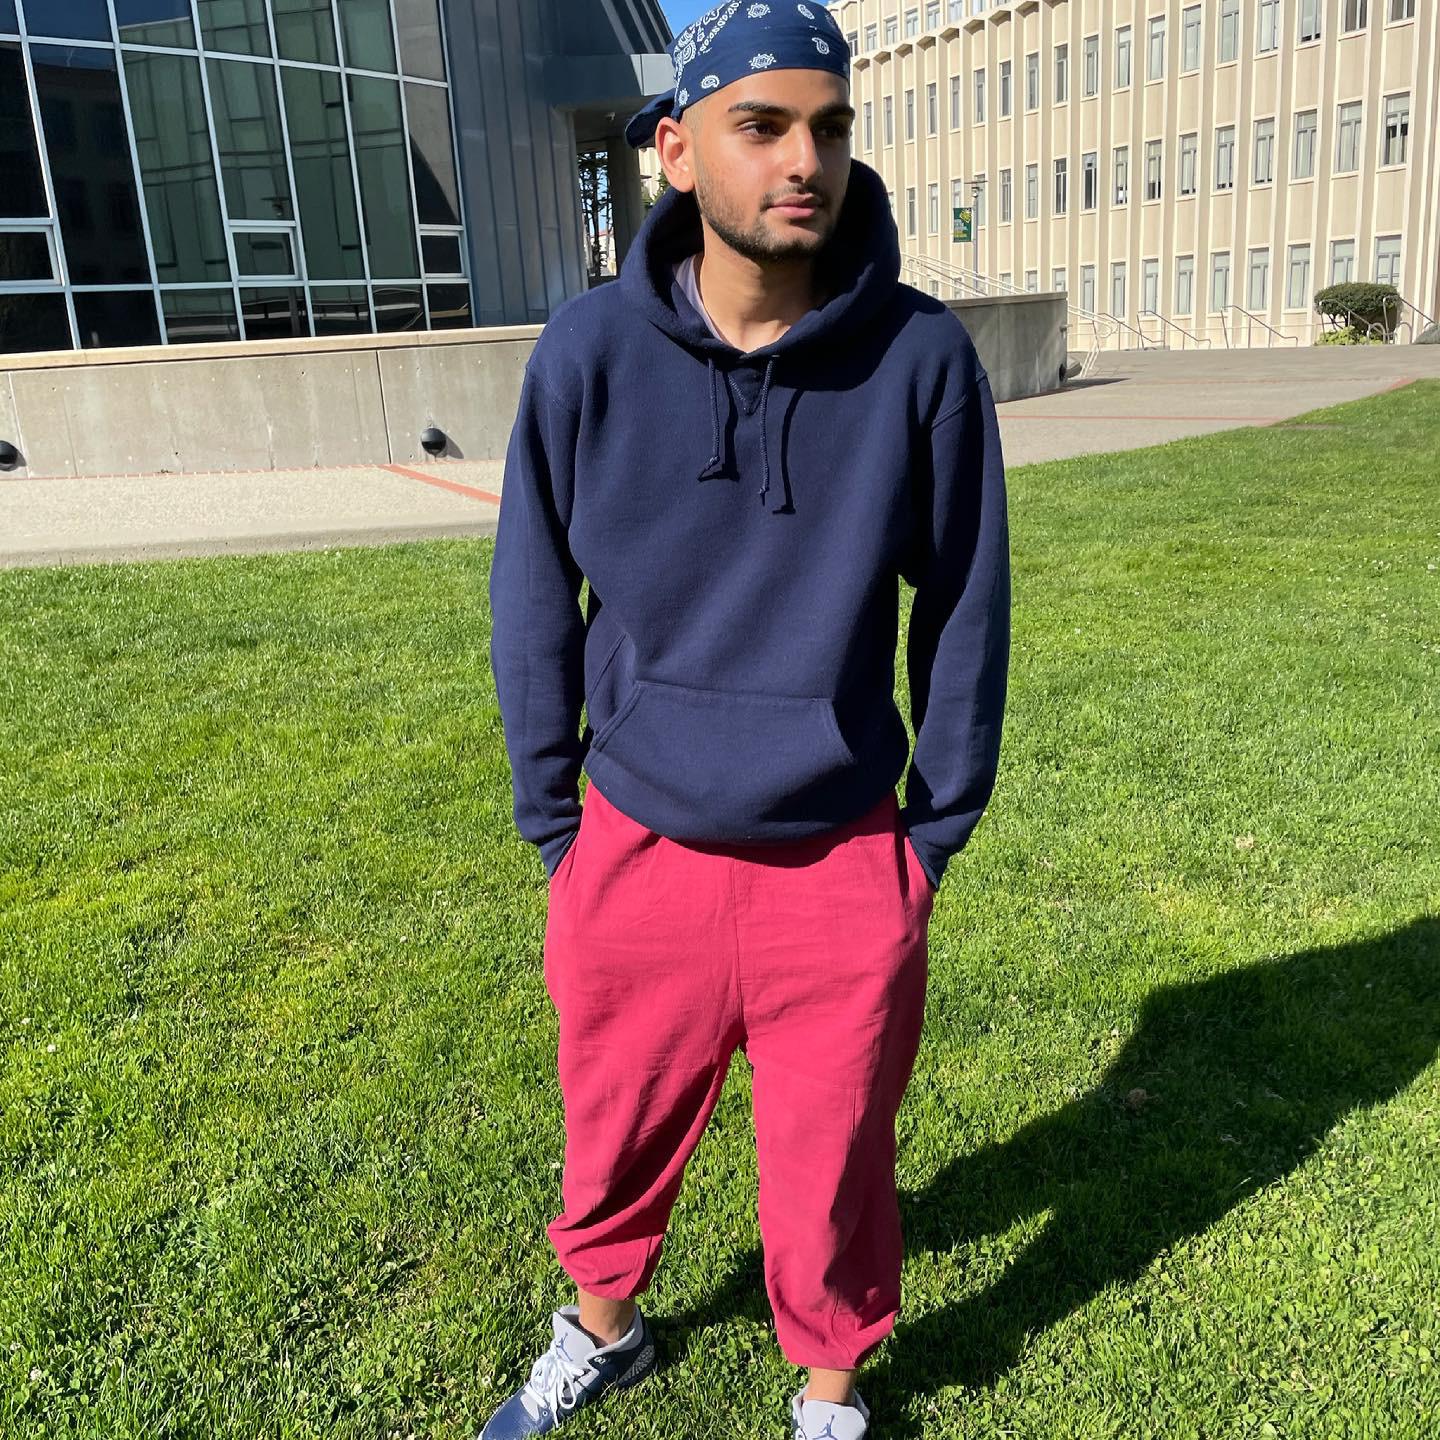 Abdullah Jamalallail wears pink sweats and a blue hoodie as a college student in San Francisco.